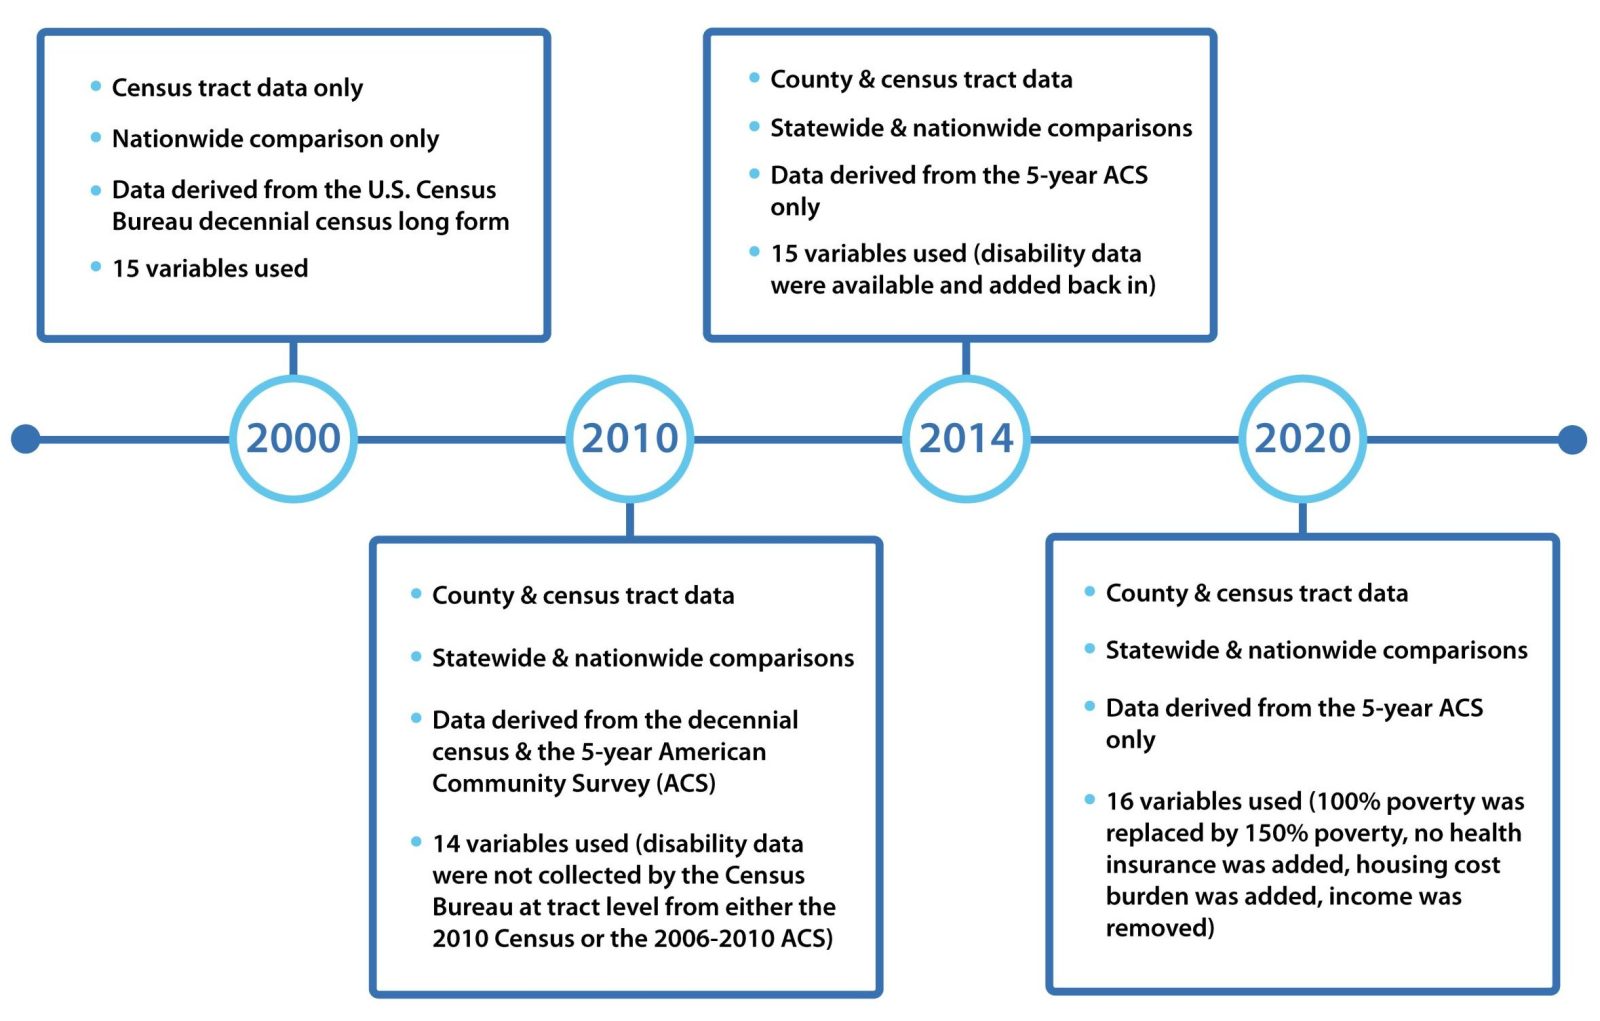 Timeline showing CDC/ATSDR SVI changes over four years in 2000, 2010, 2014, and 2020.